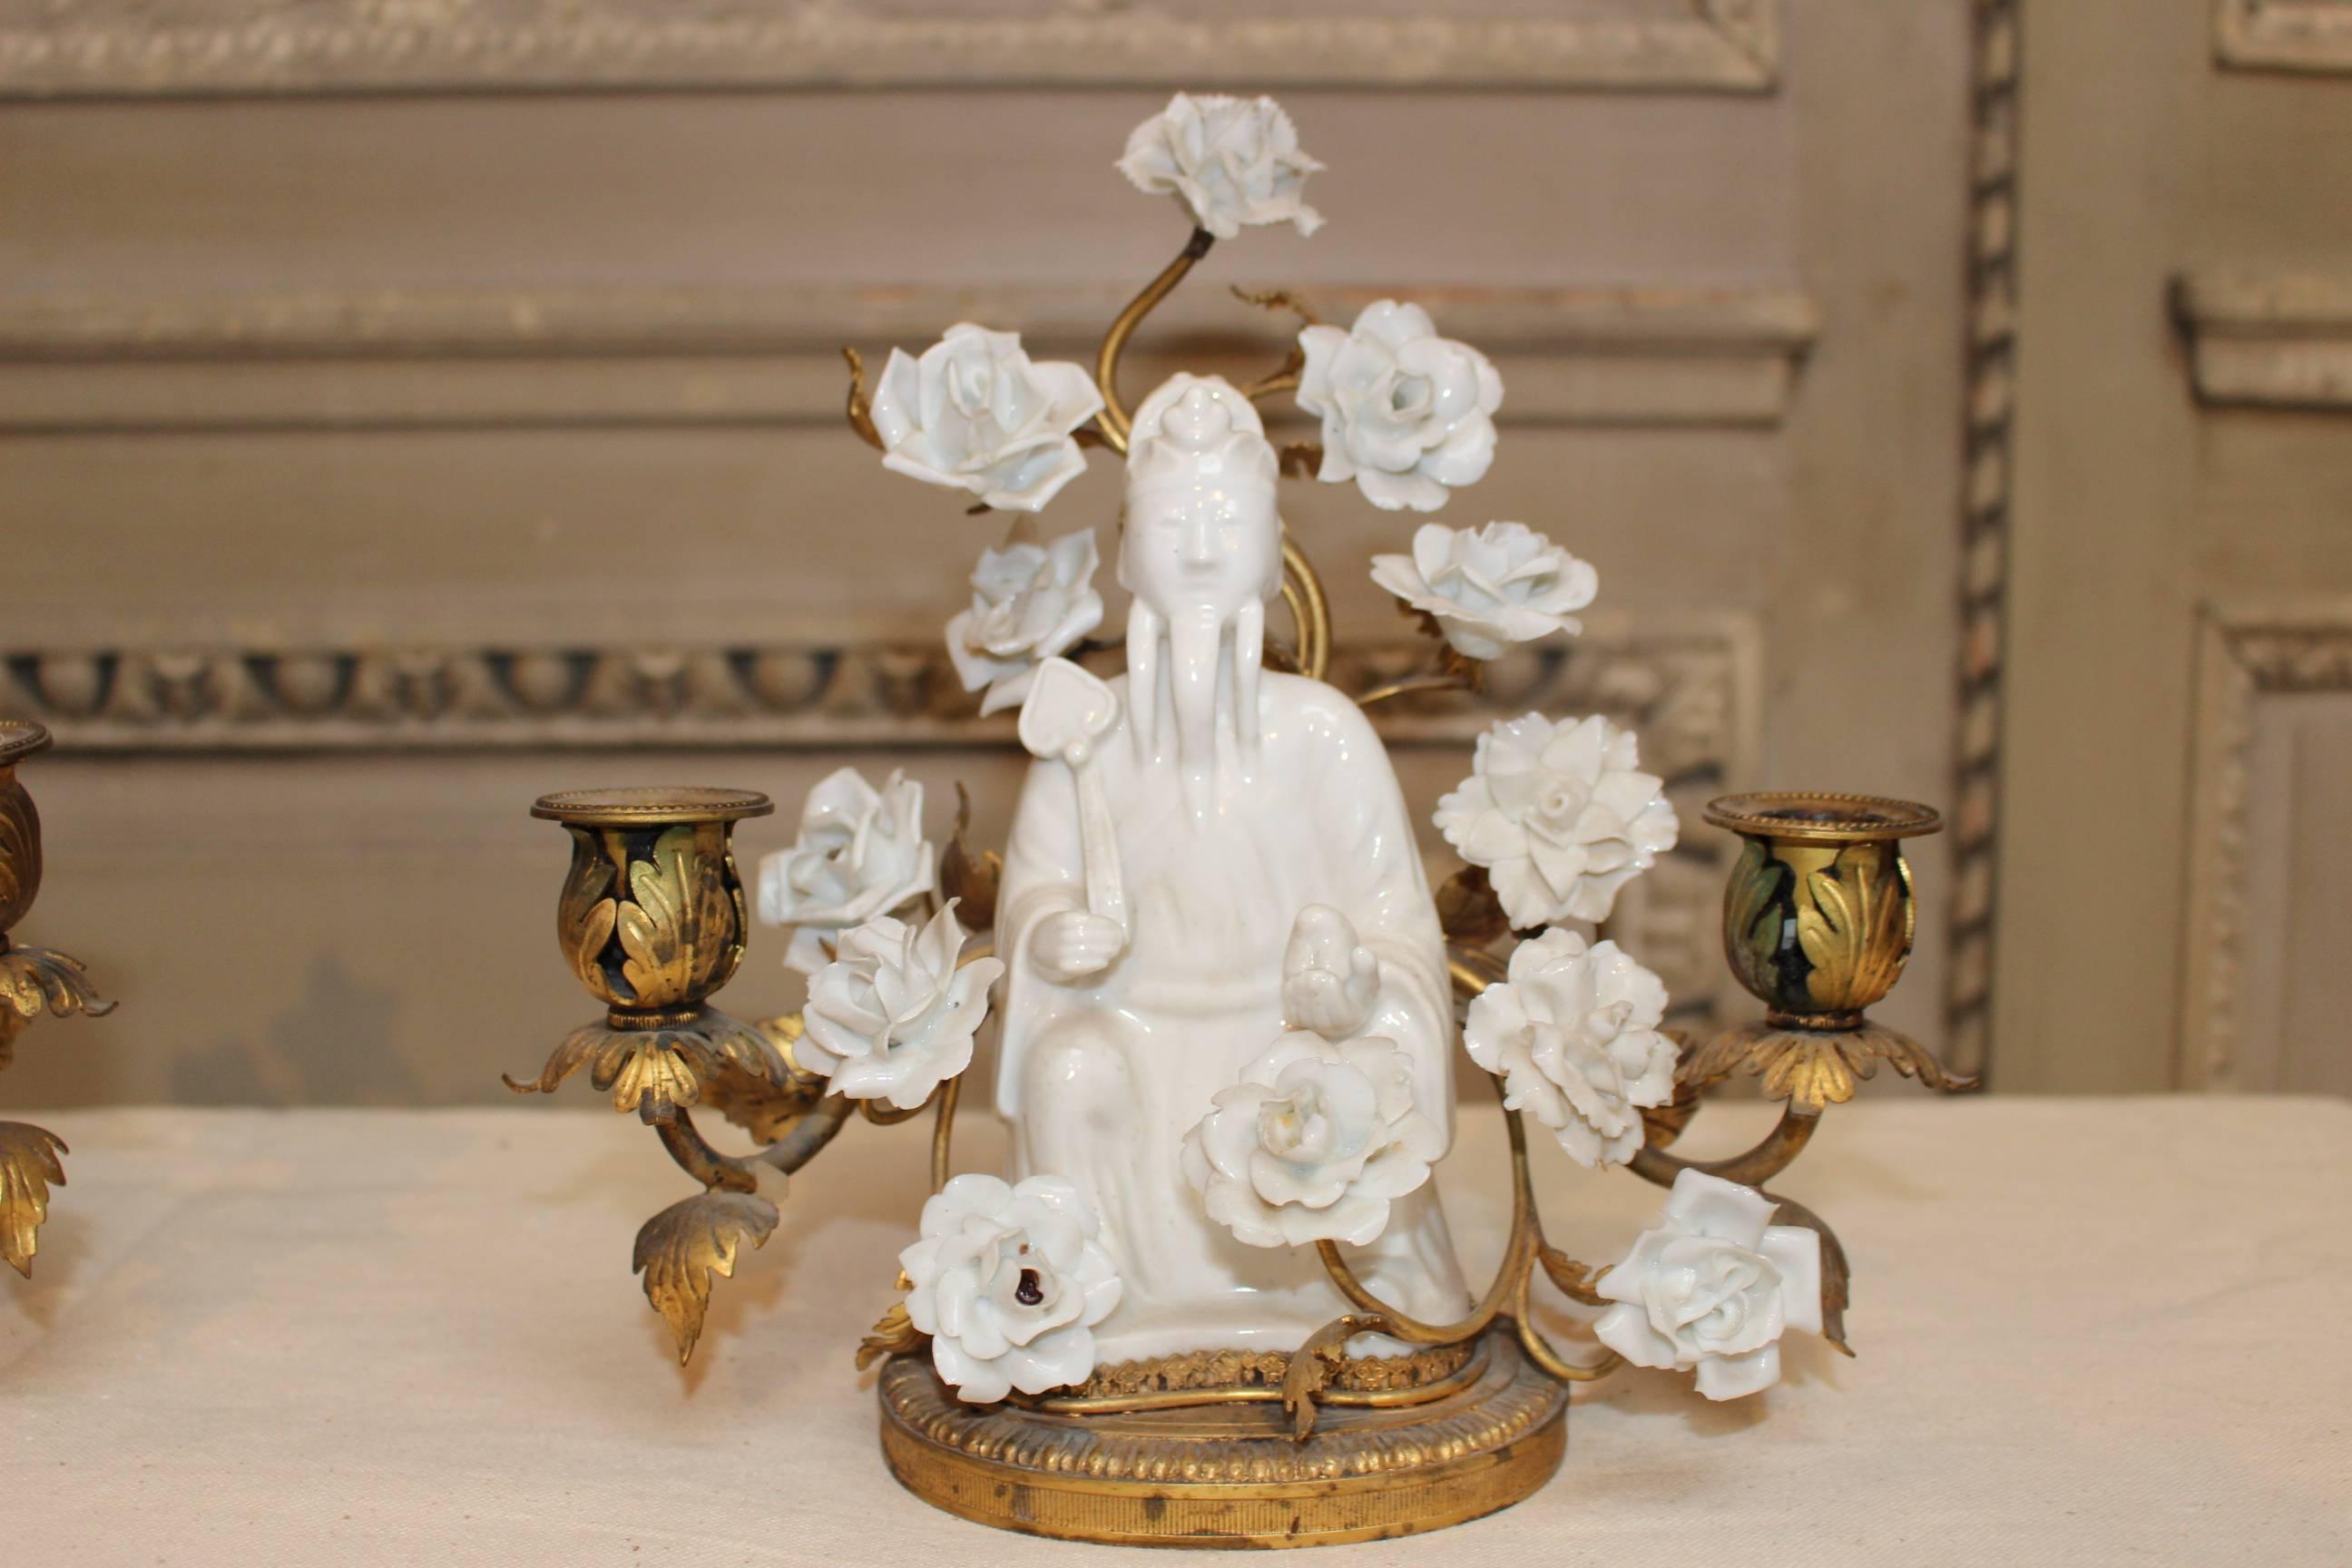 A pair of Chinese porcelain figures with French porcelain flowers and bronze mounts.